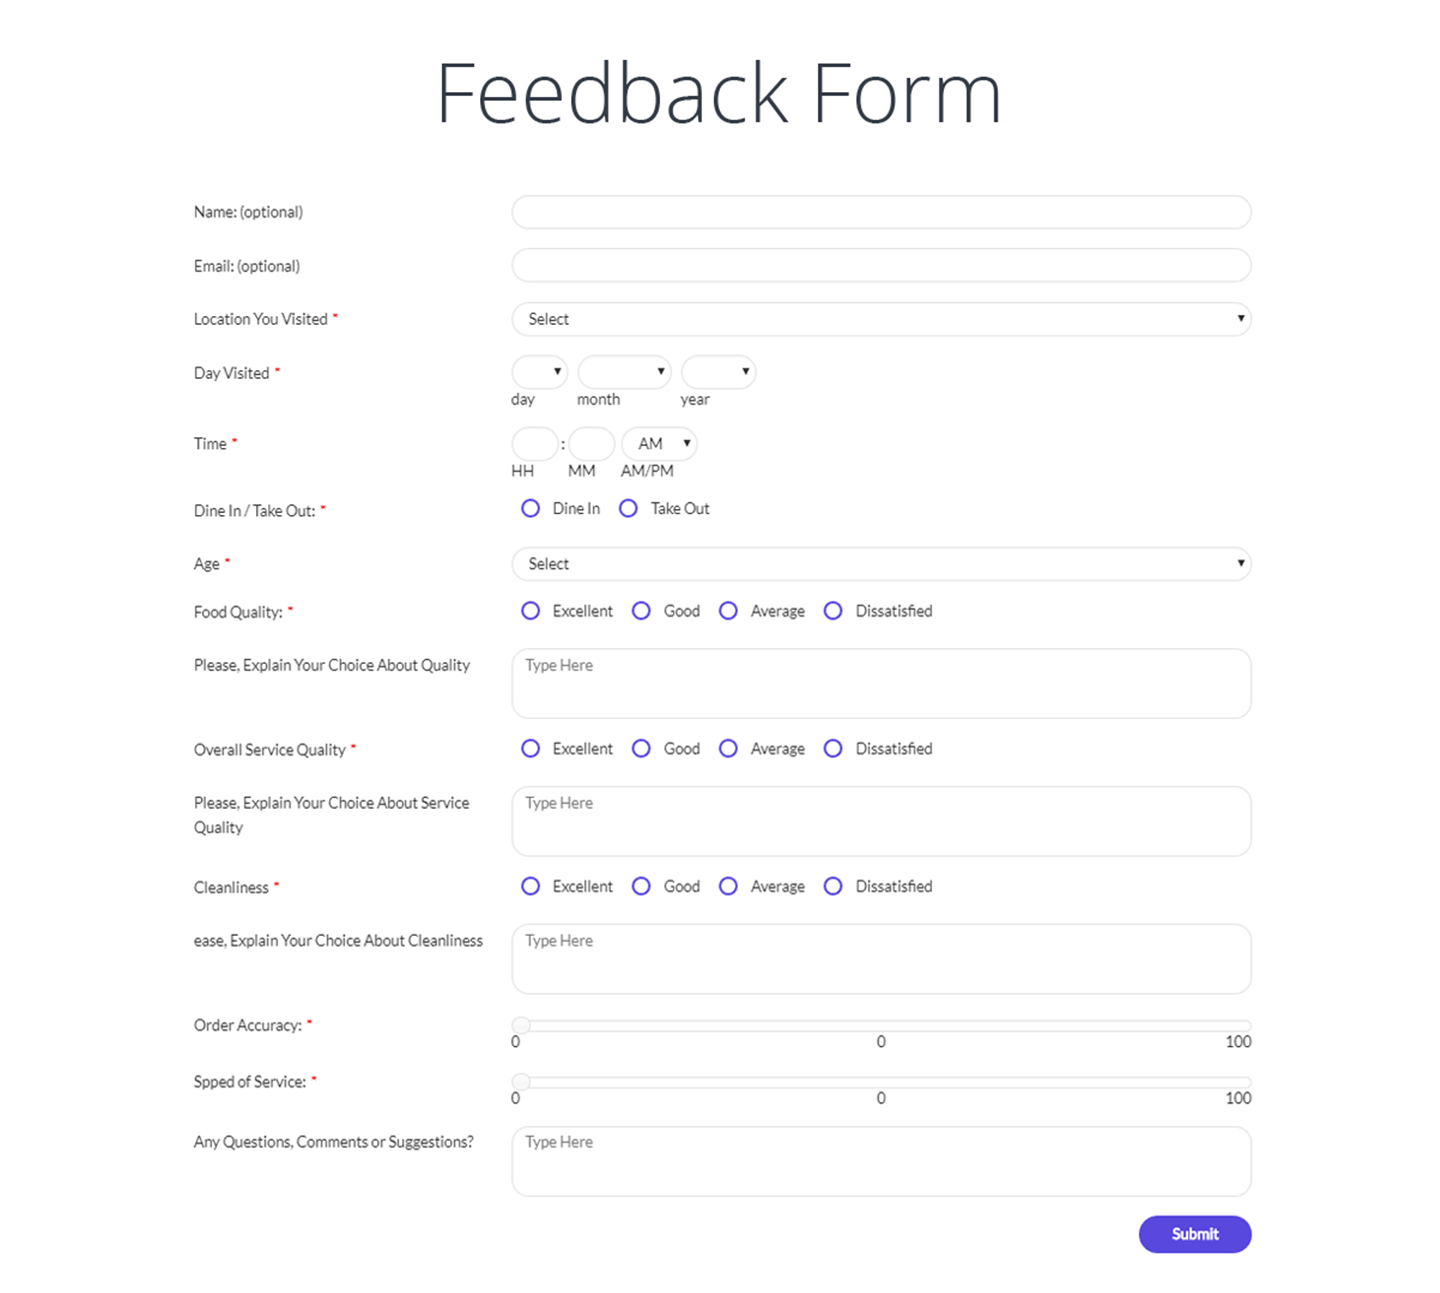 Feedback form with number range sliders, radio buttons, etc.